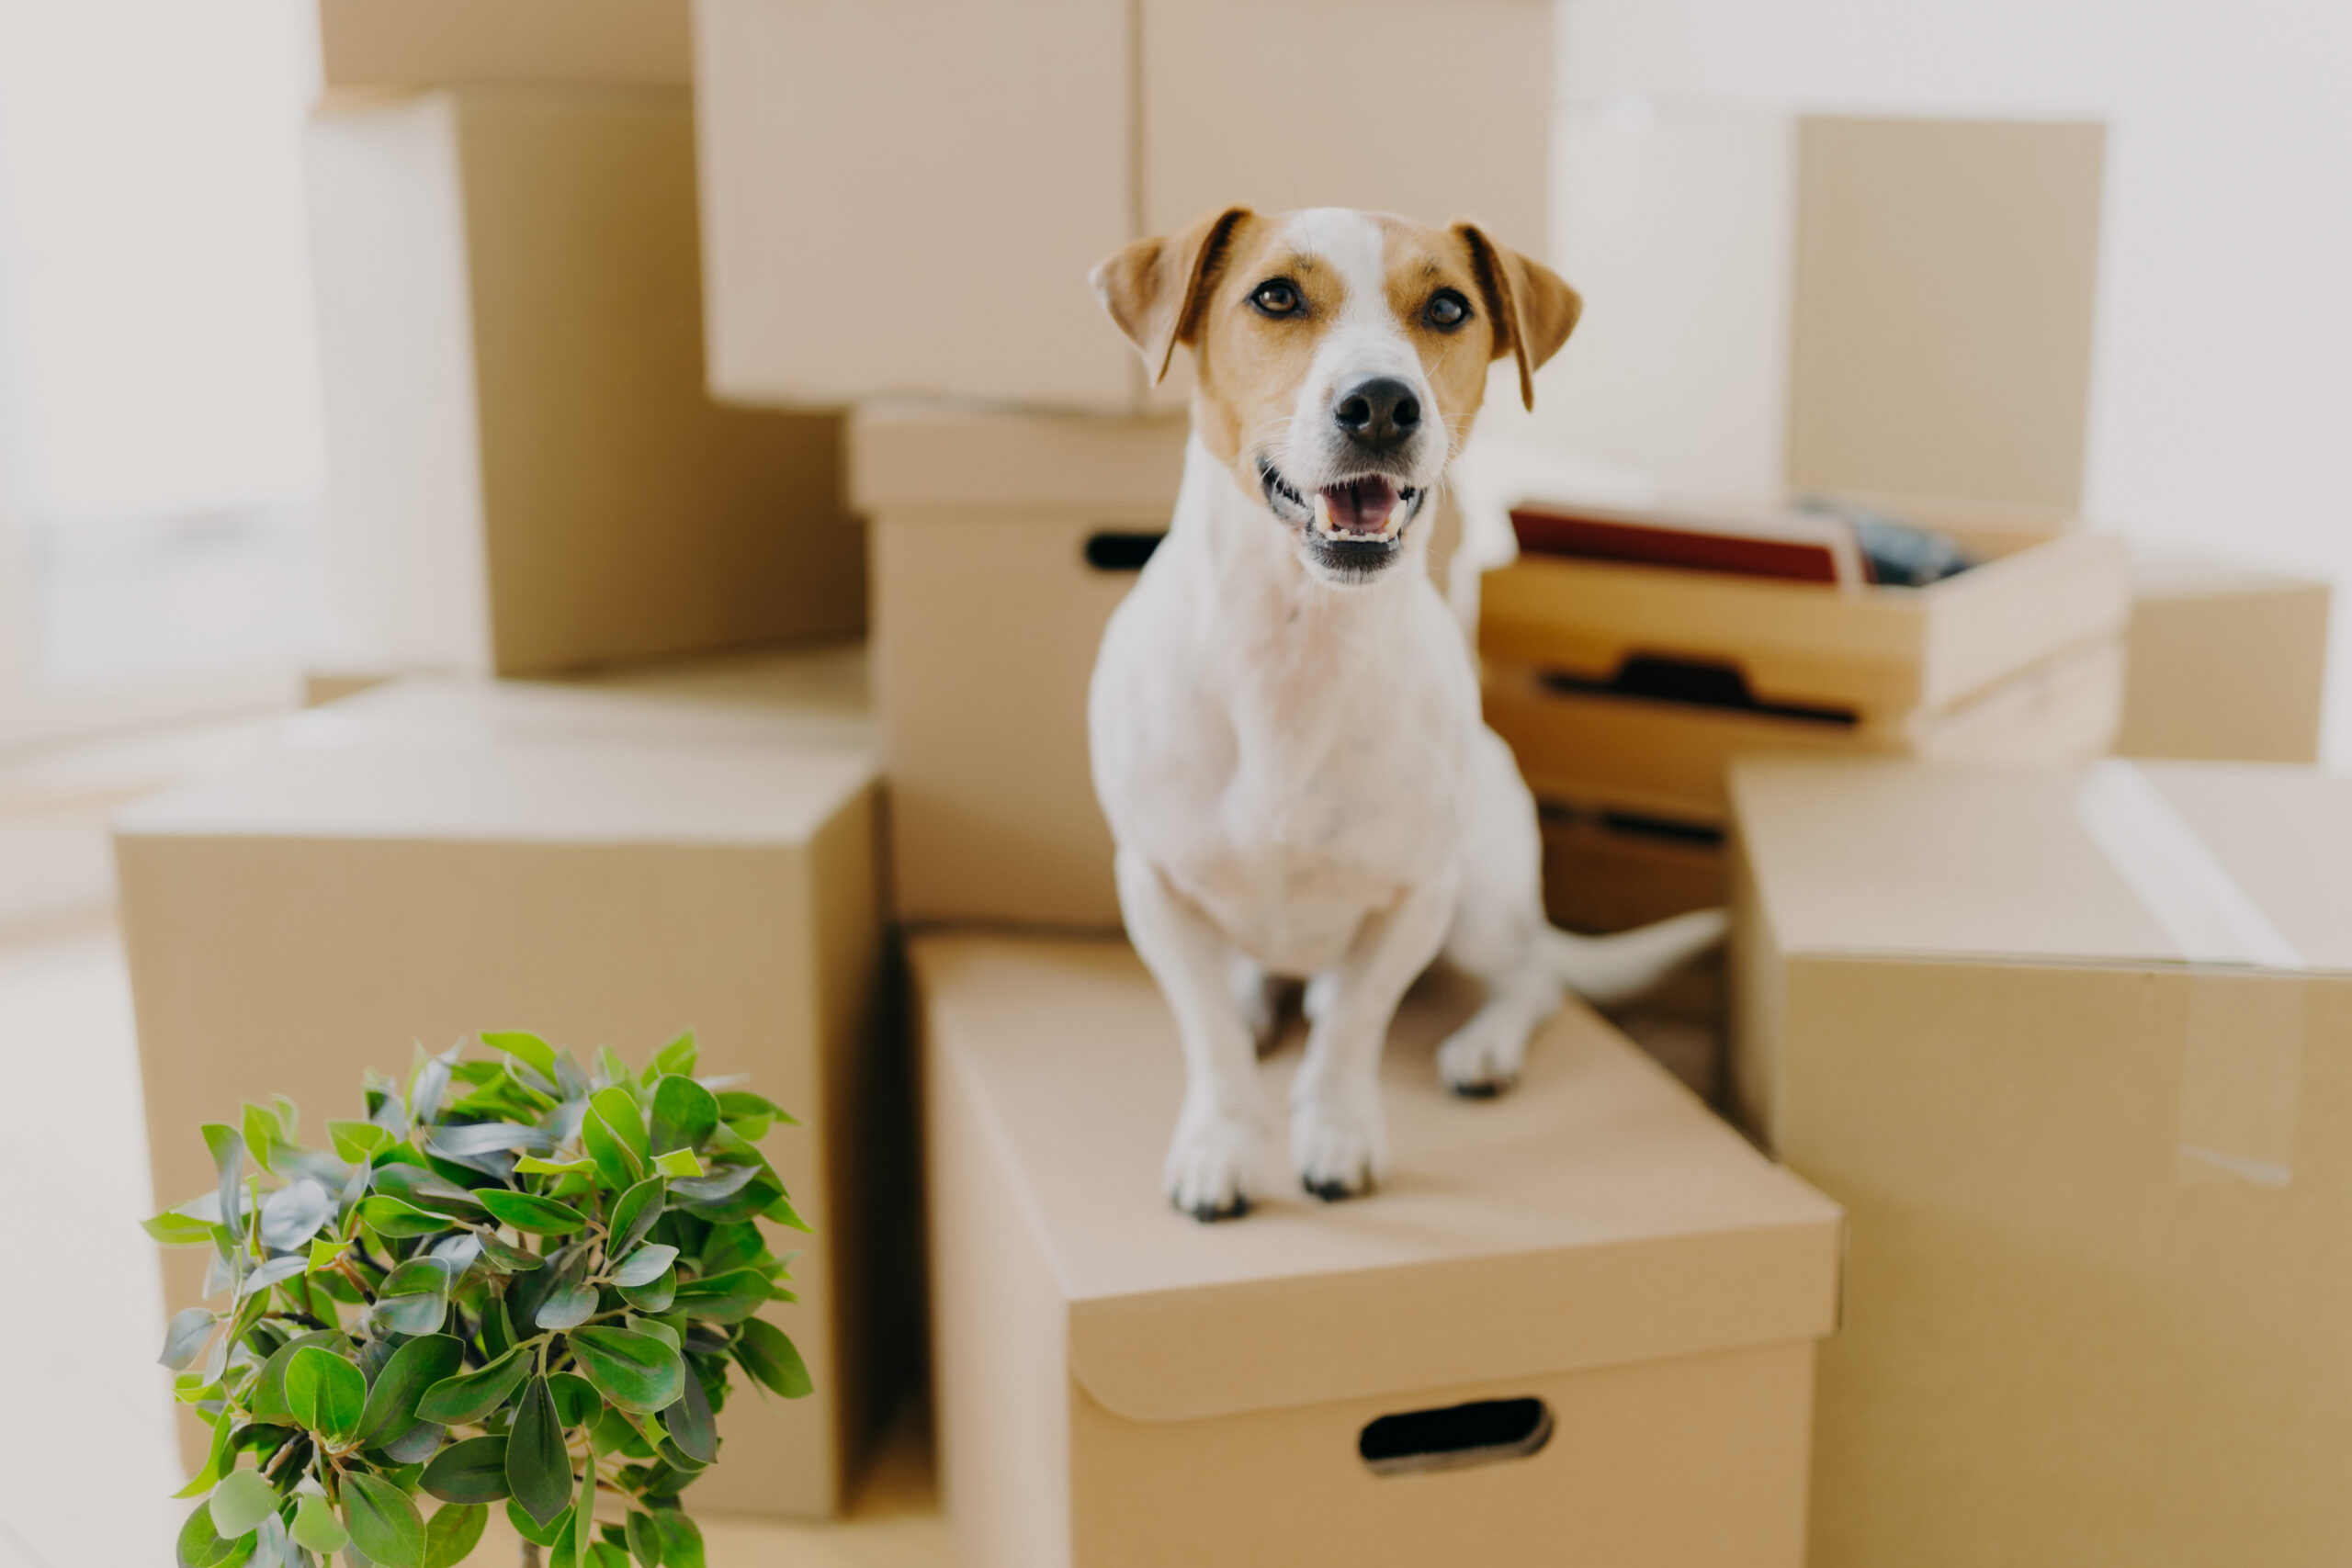 Pet relocation is a service offered by NRI's corporate relocation policy